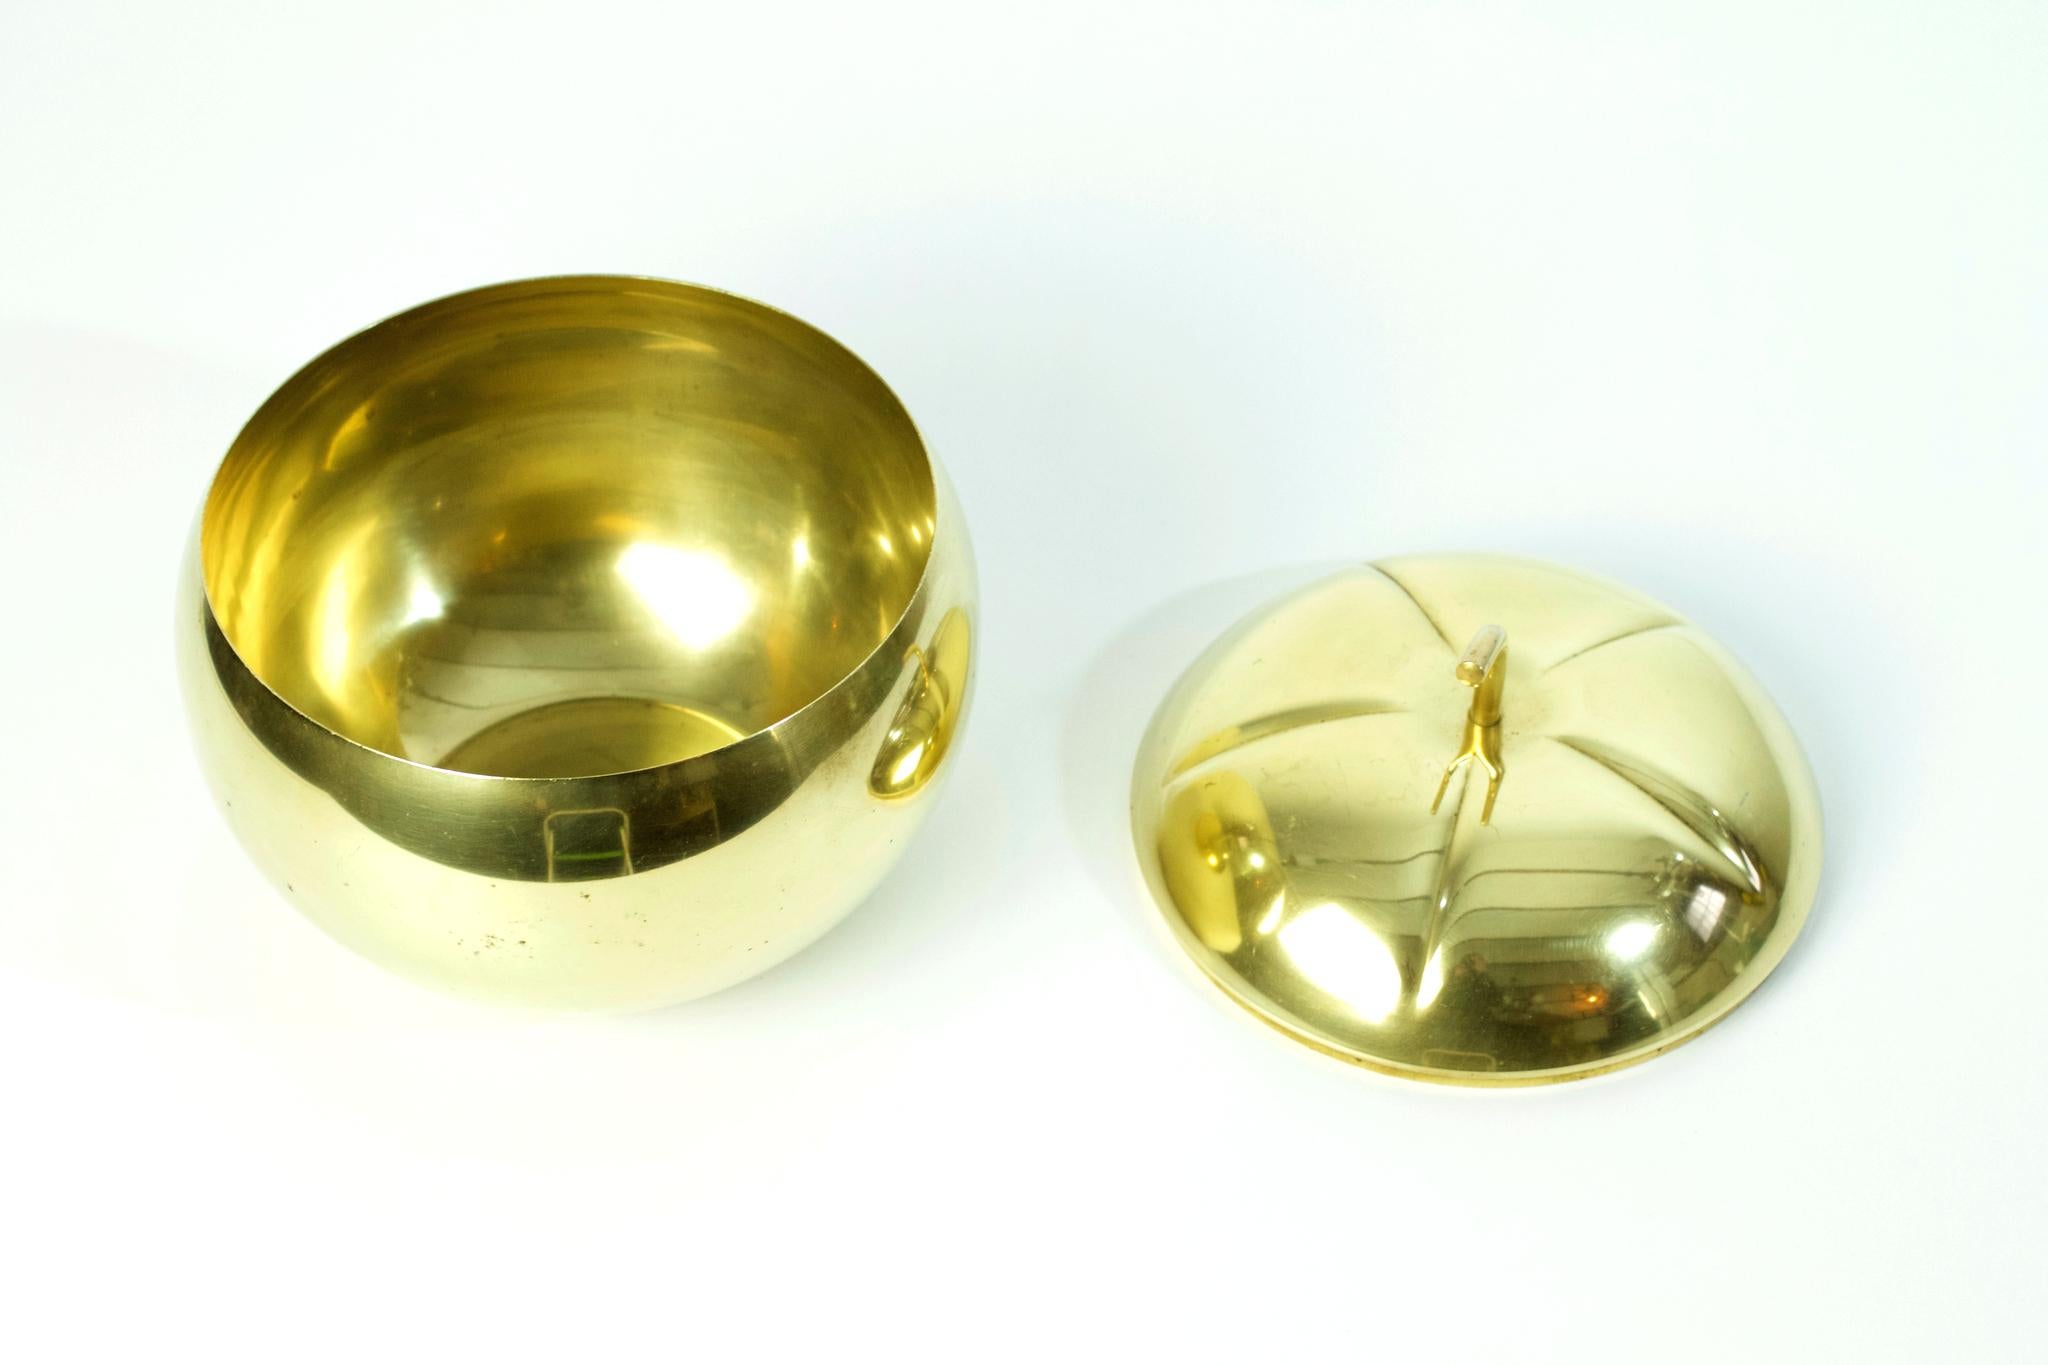 A large handcrafted ice bucket or bowl in the shape of a pumpkin in brass.